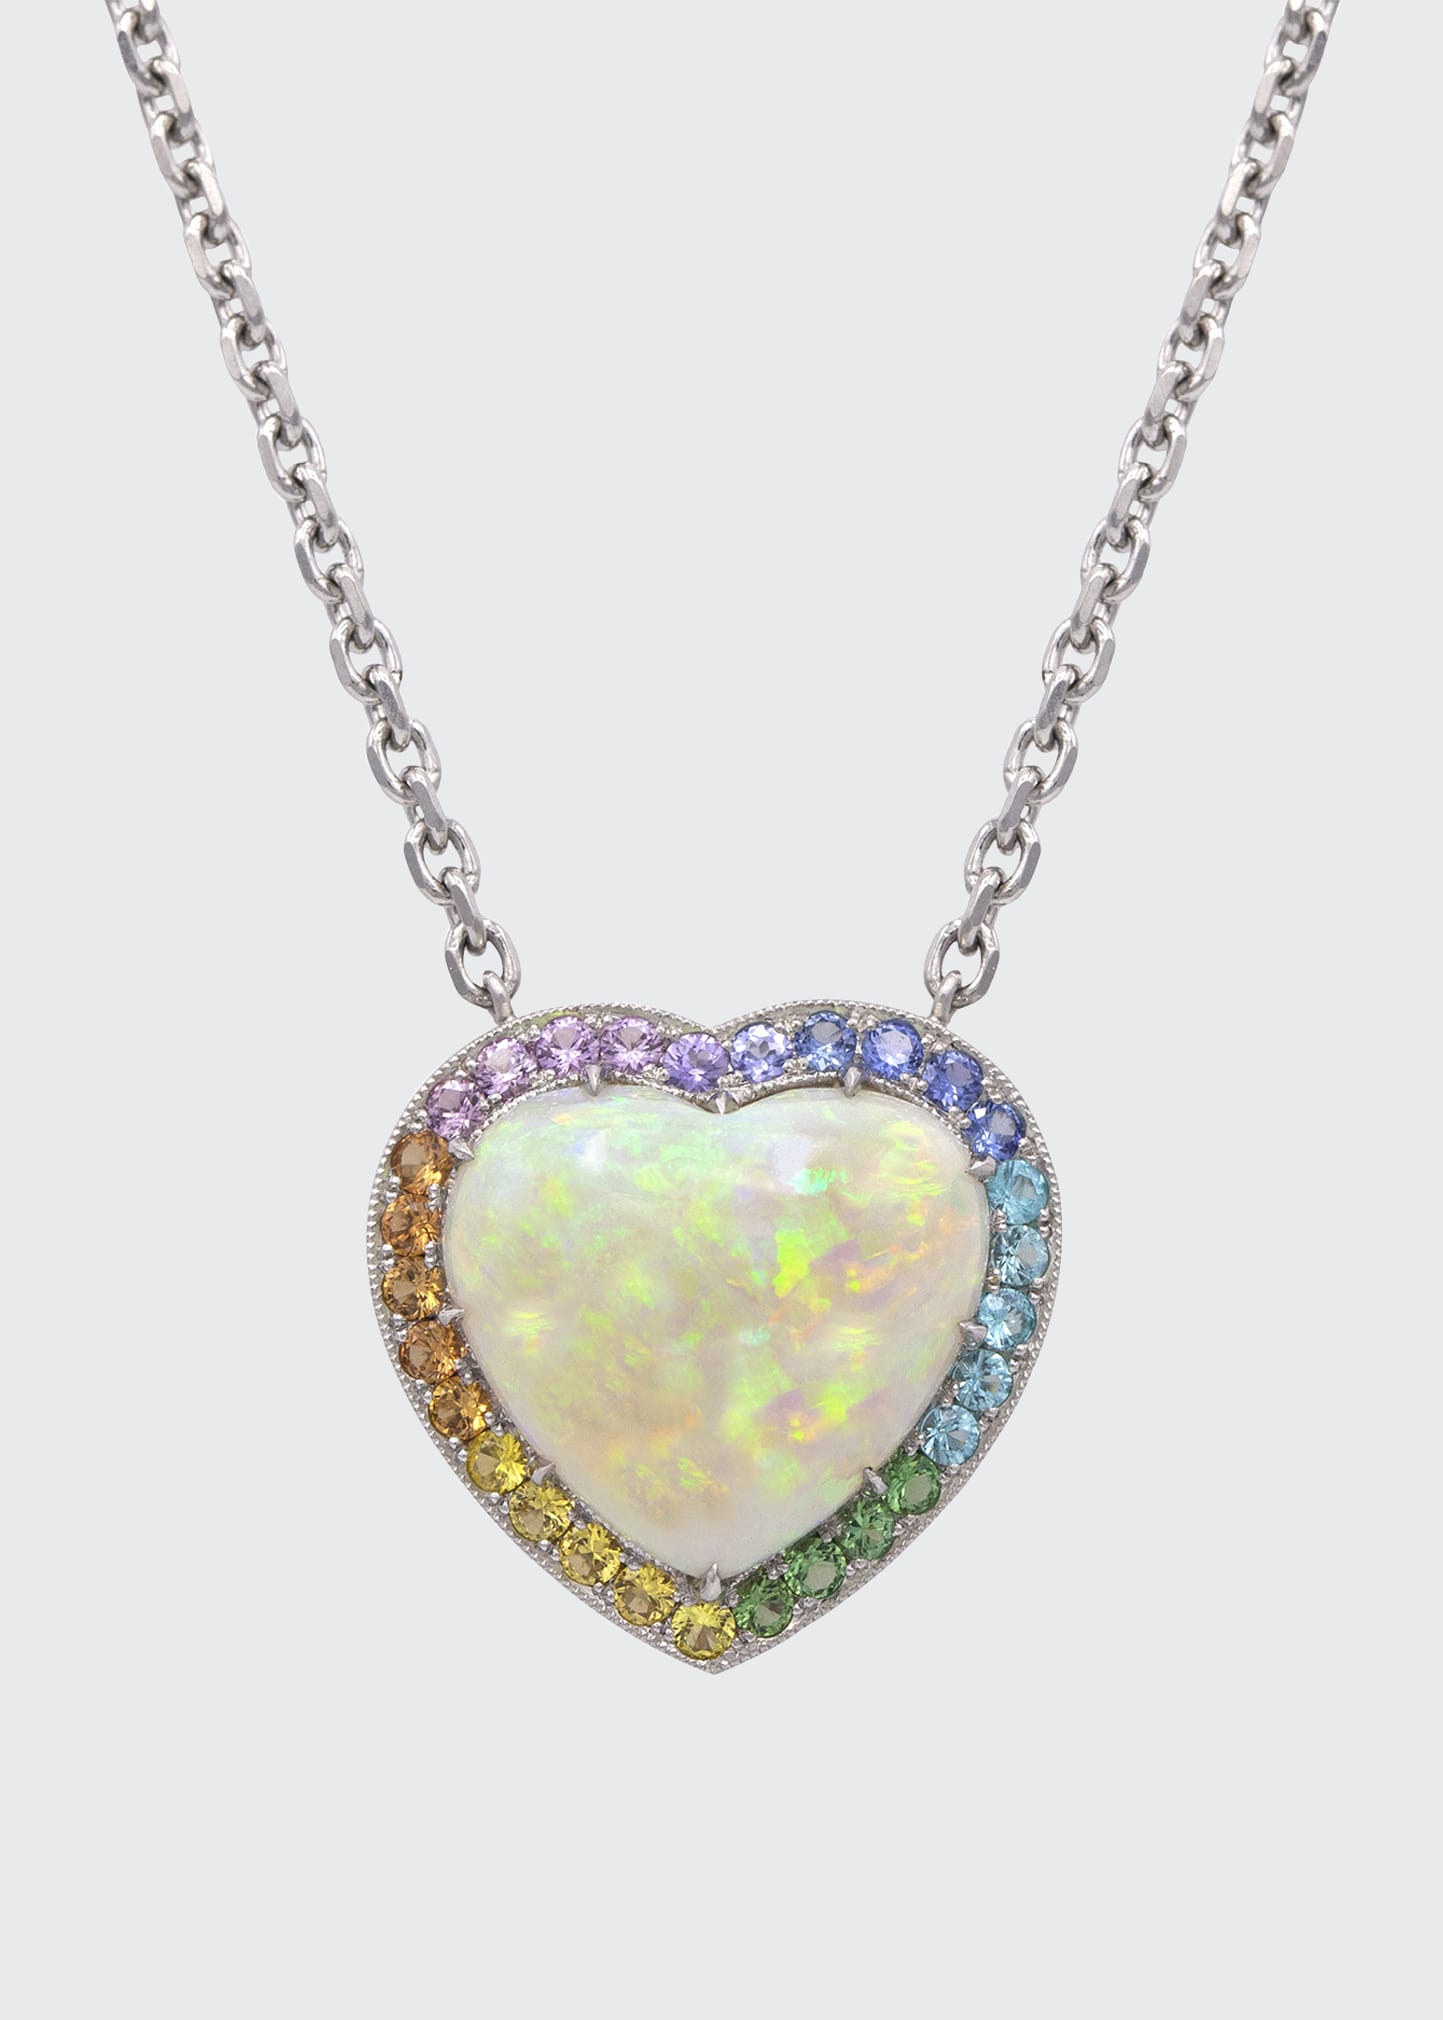 Featherstone Design Australian Opal Heart Necklace with Ombr&eacute; Stones